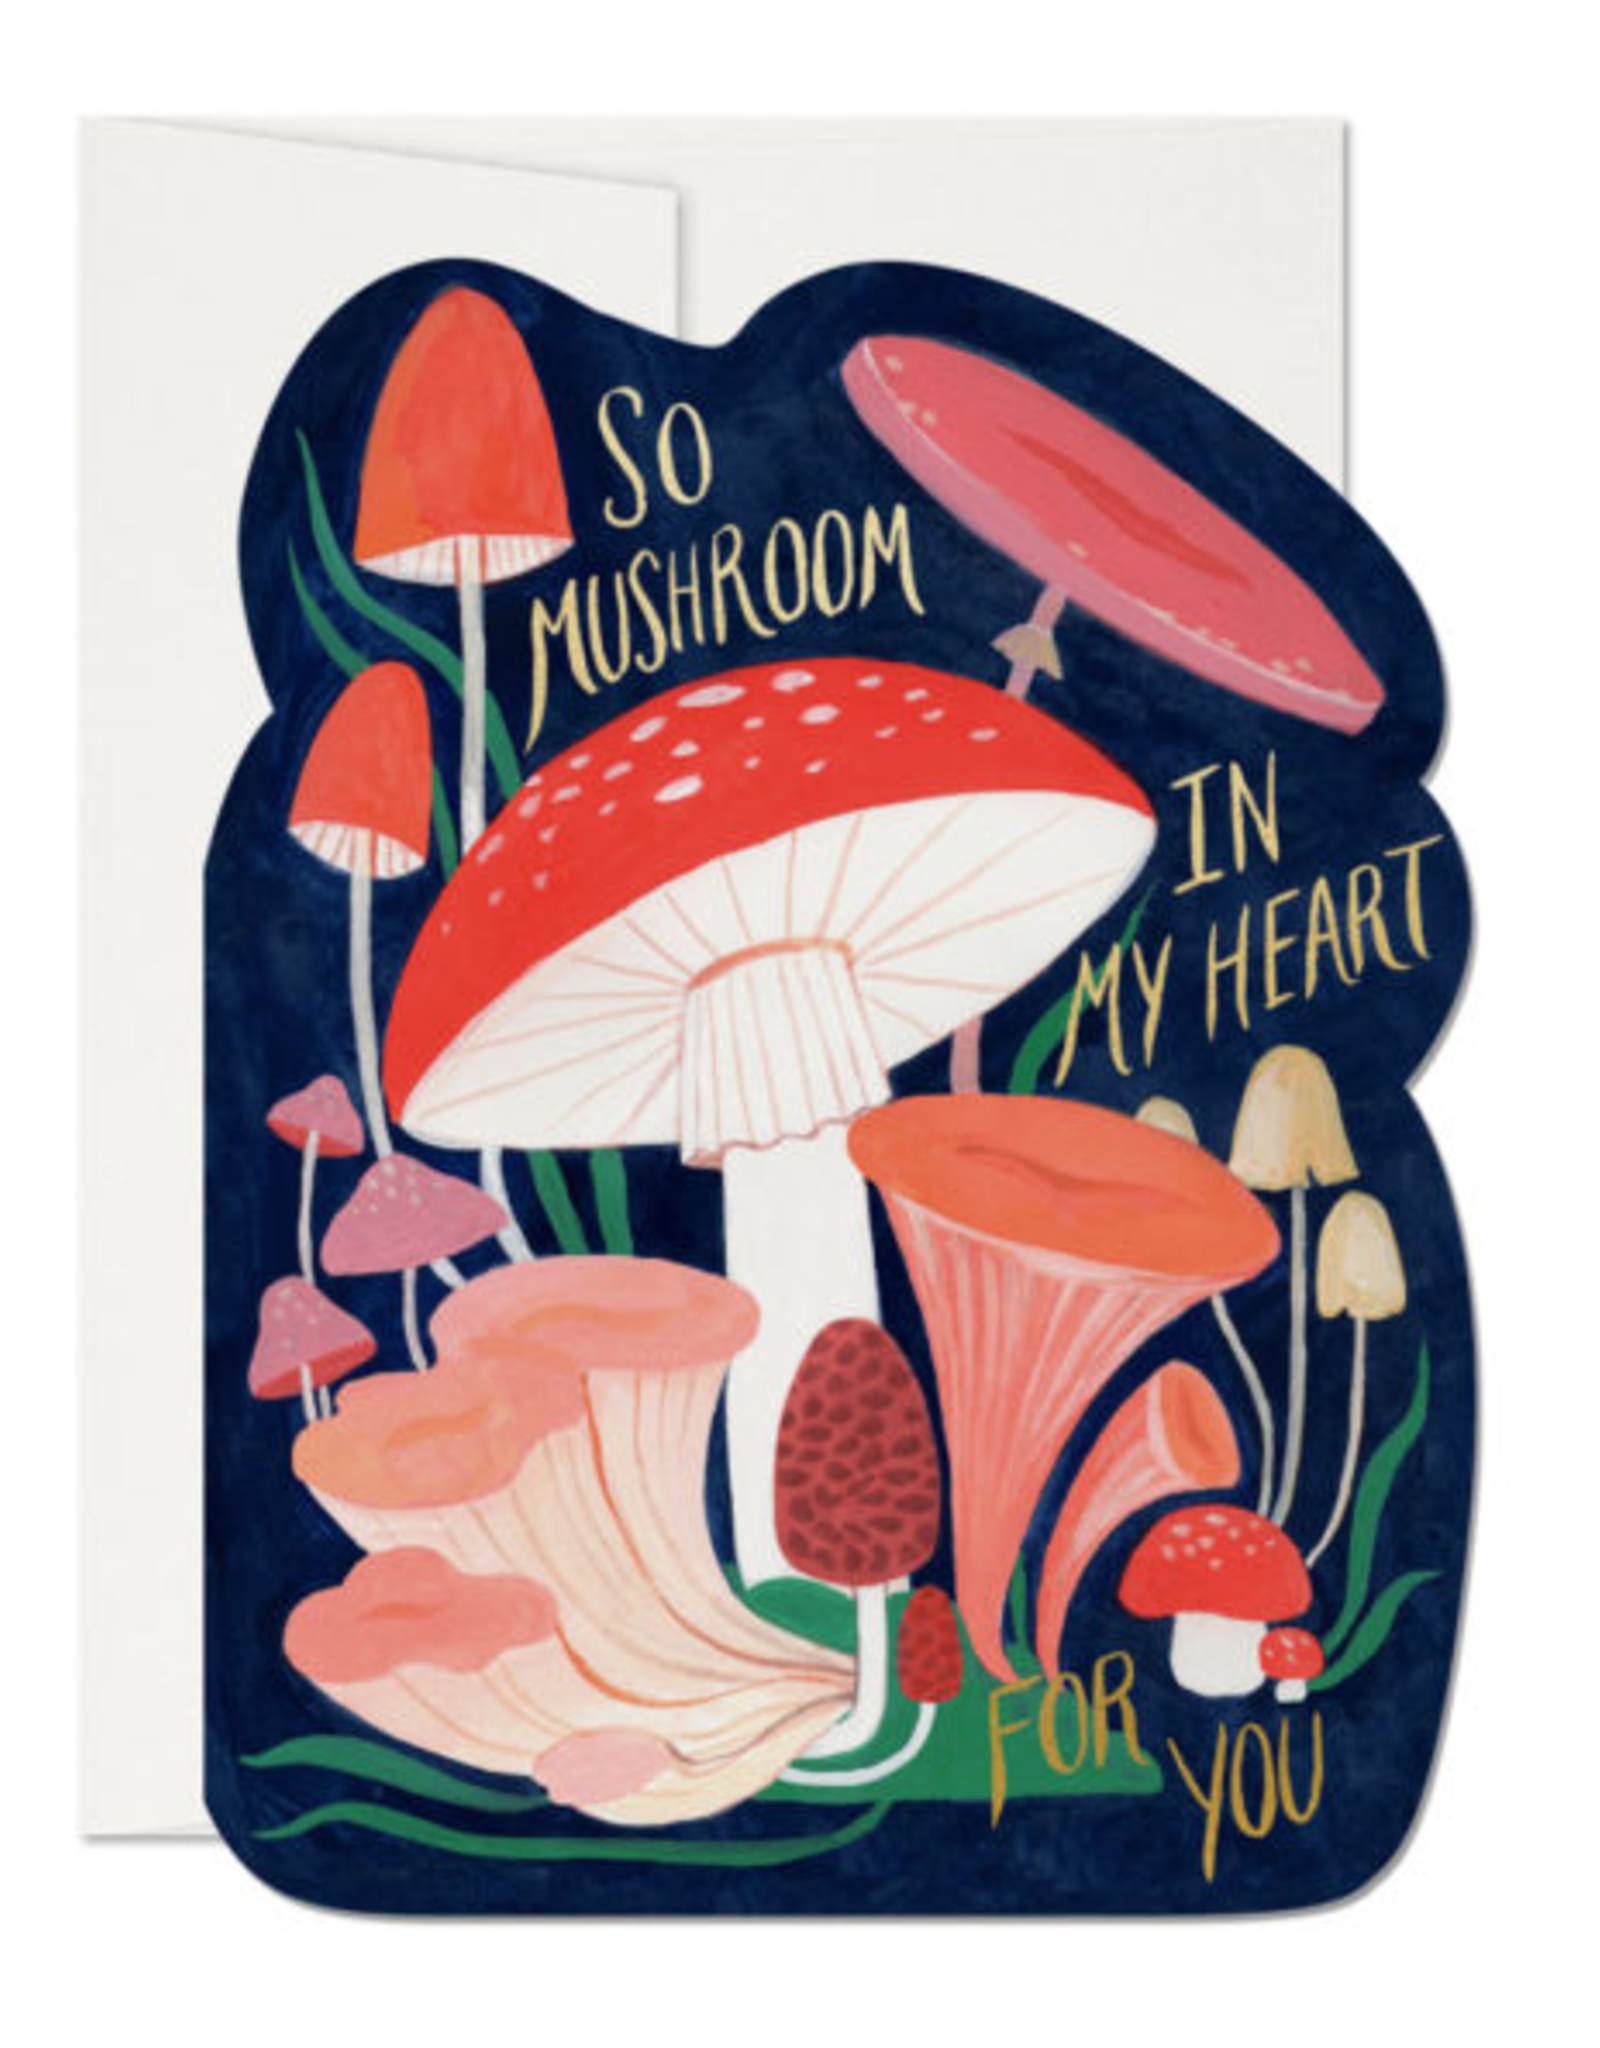 So Mushroom in My Heart For You Greeting Card